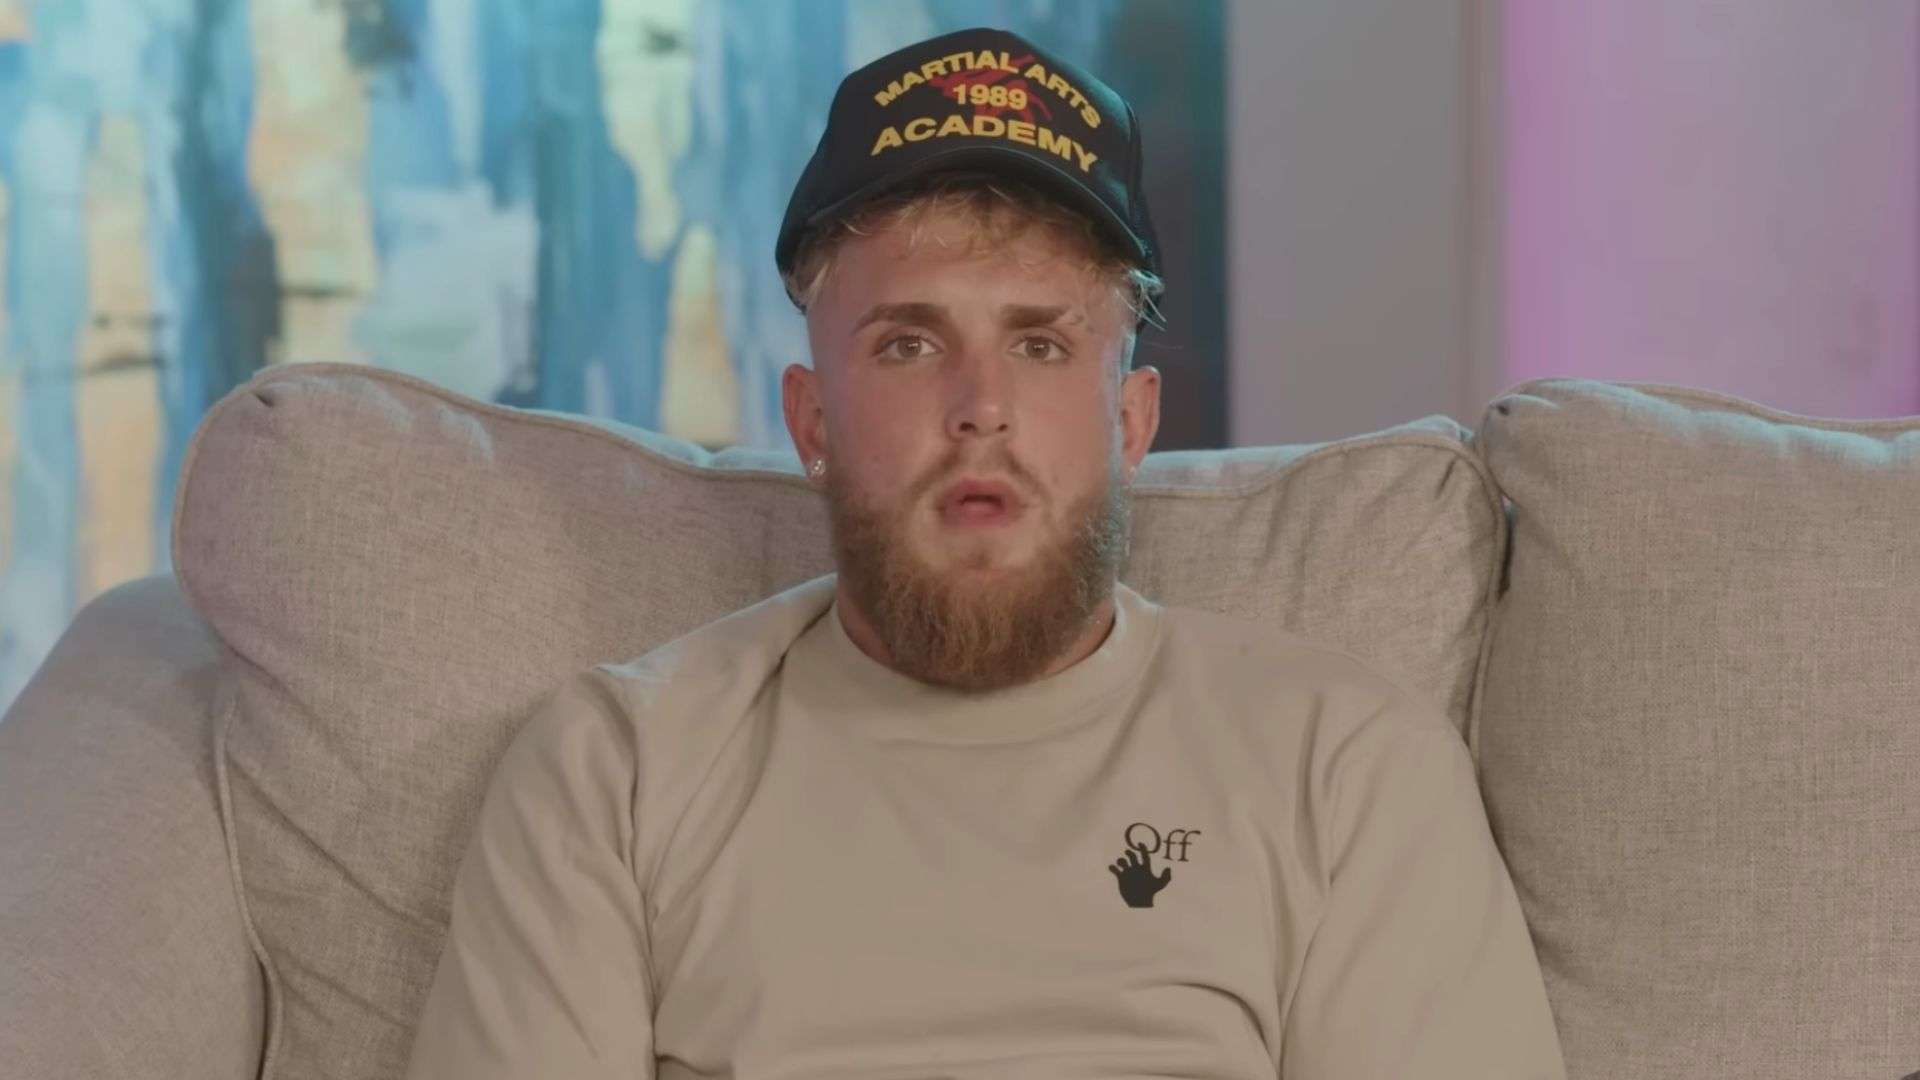 Jake Paul sitting on sofa talking to camera in hat and t-shirt